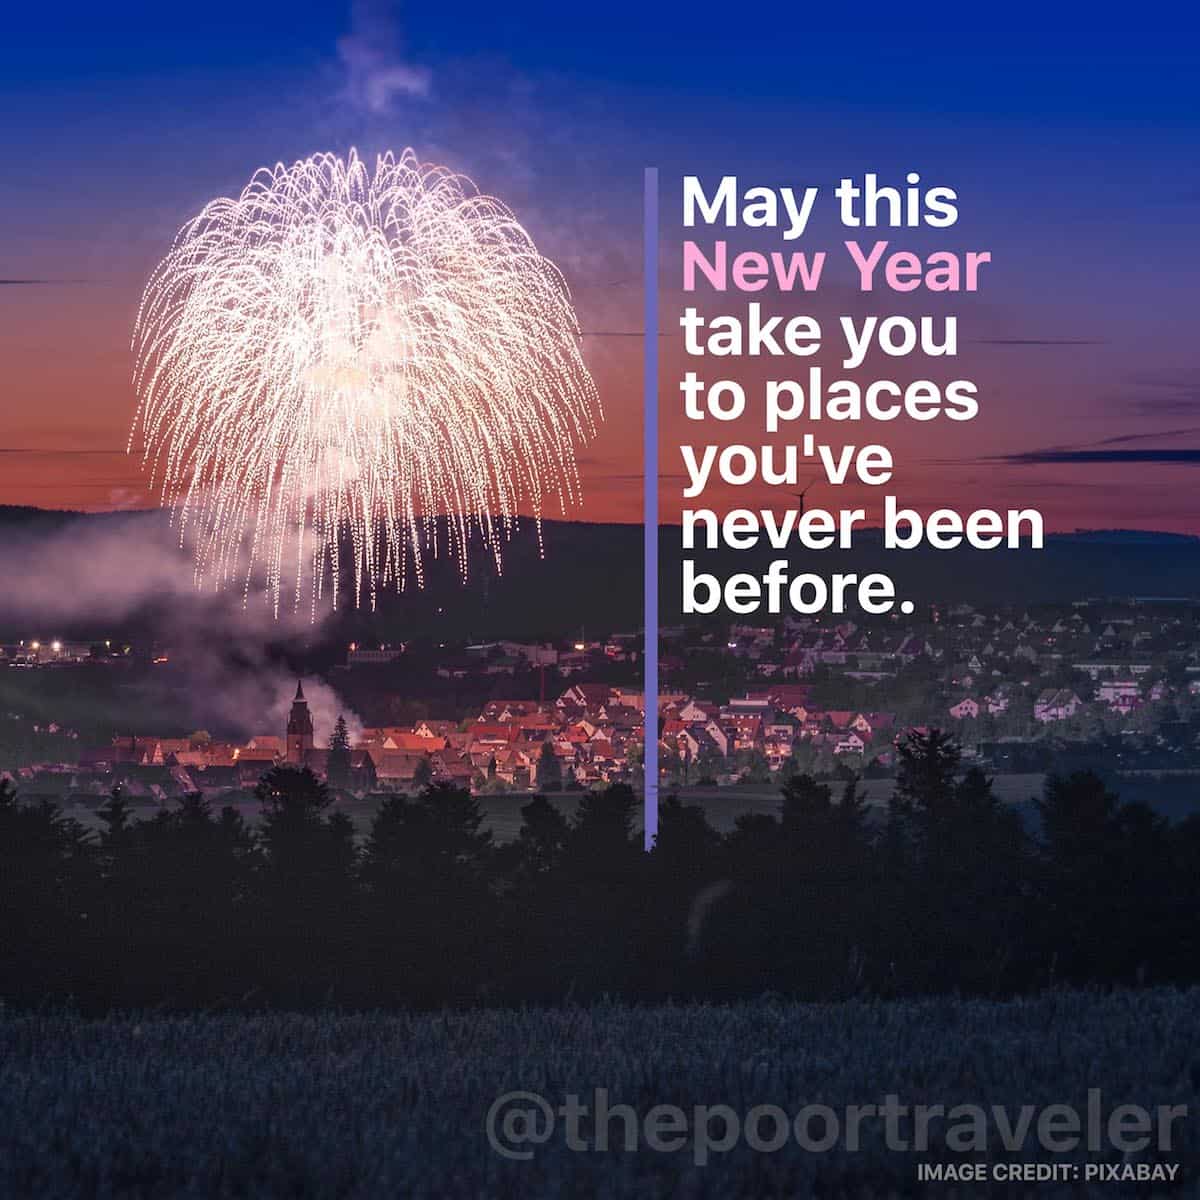 12 NEW YEAR QUOTES, WISHES & GREETINGS for Travelers | The Poor